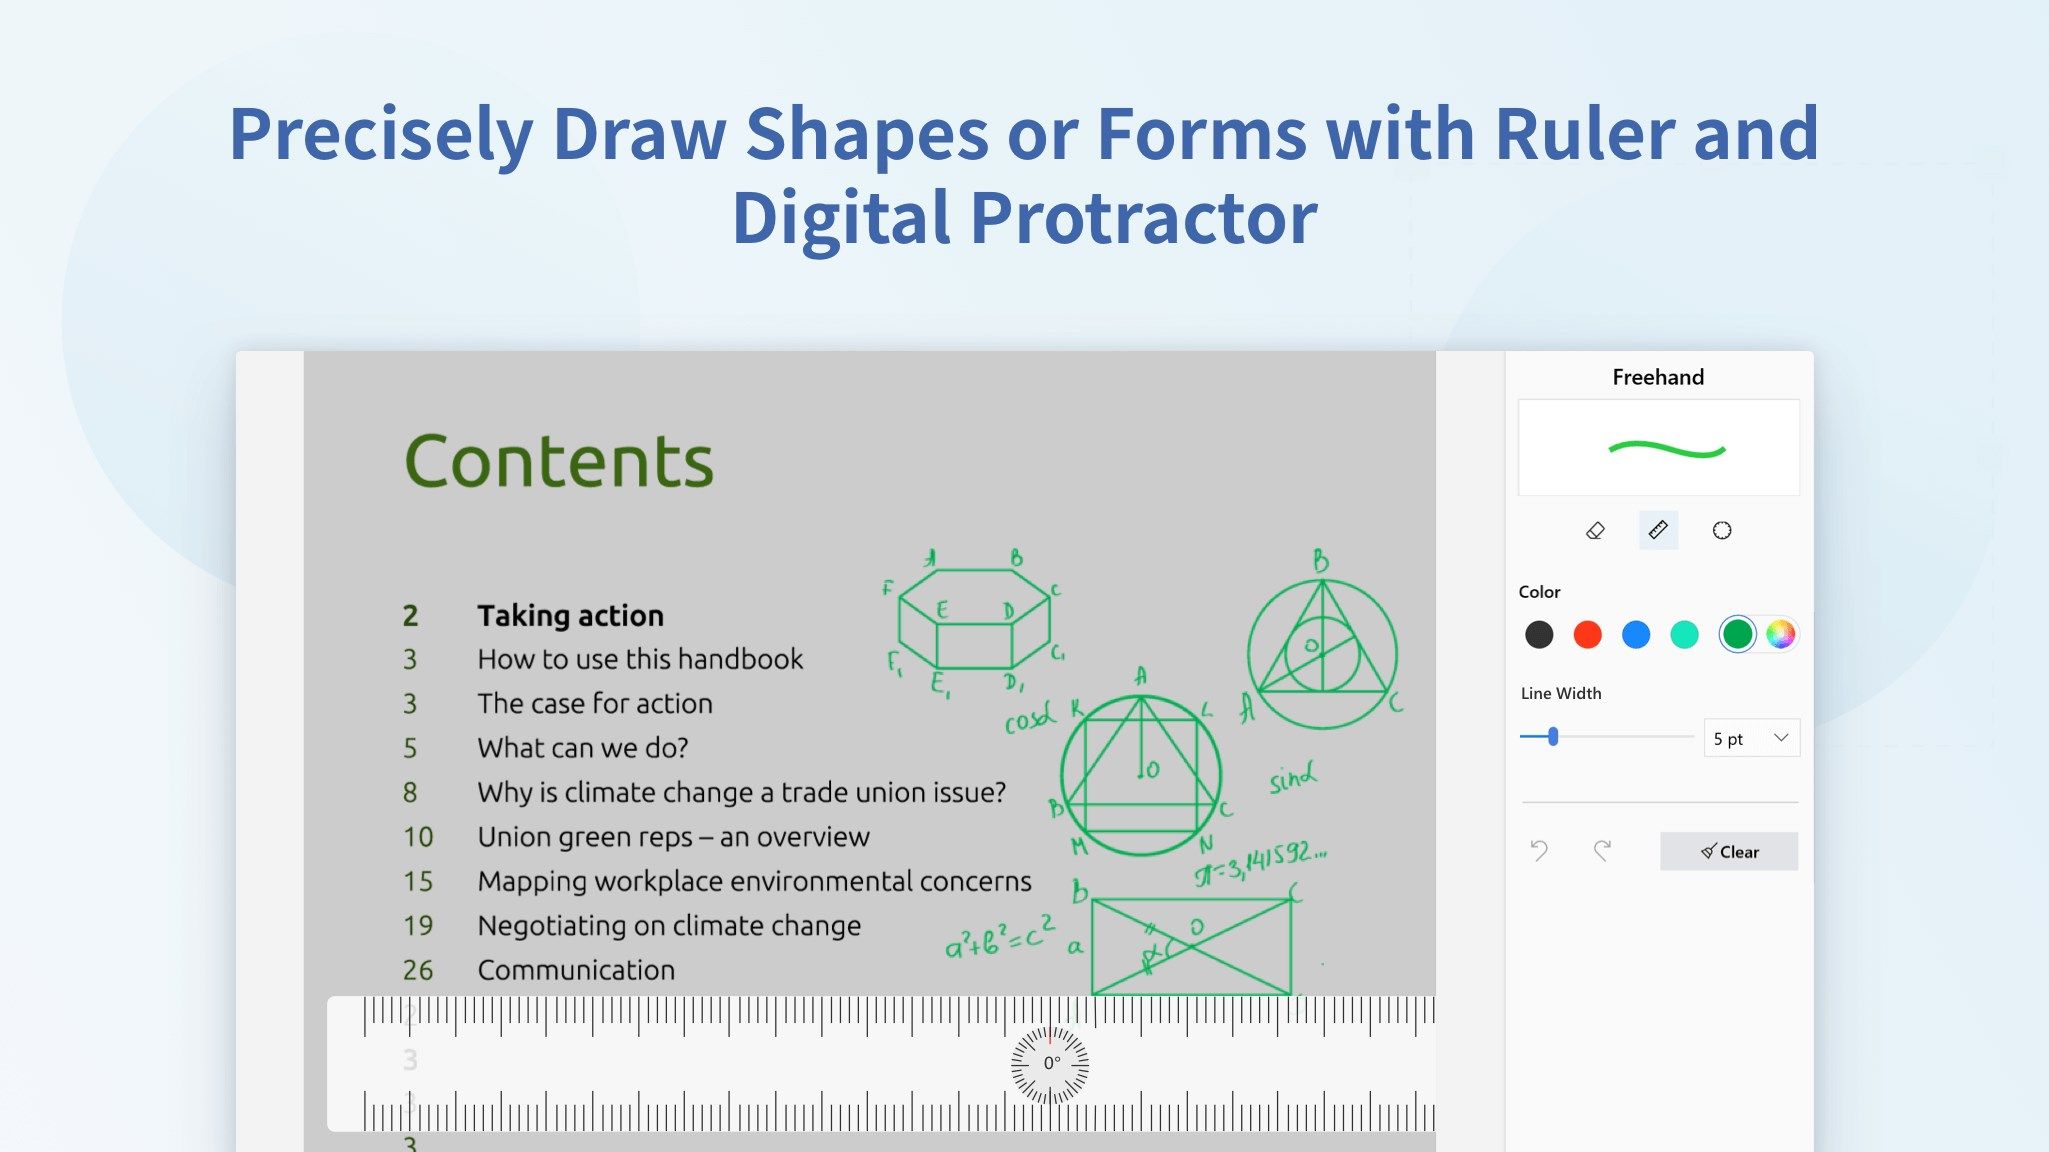 Precisely Draw Shapes or Forms with Ruler and Digital Protractor